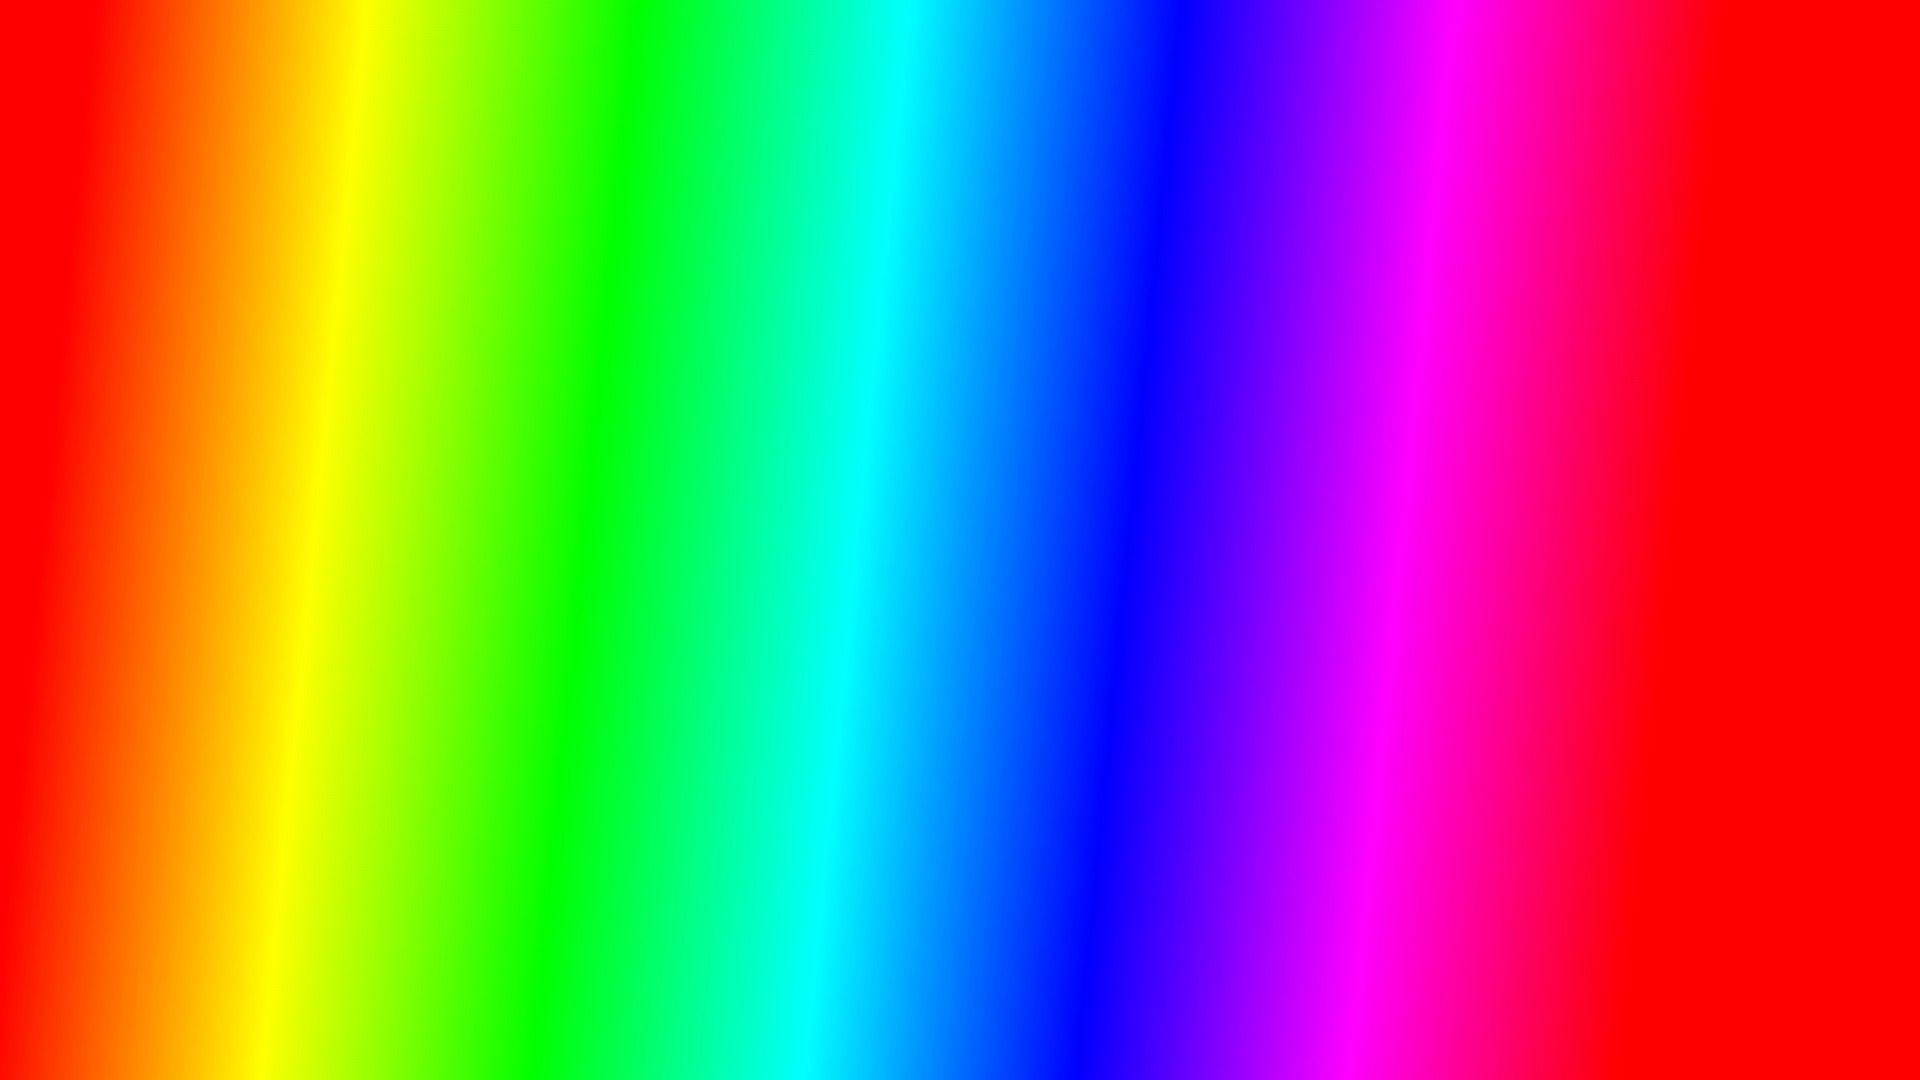 Rainbow backgroundDownload free awesome HD background